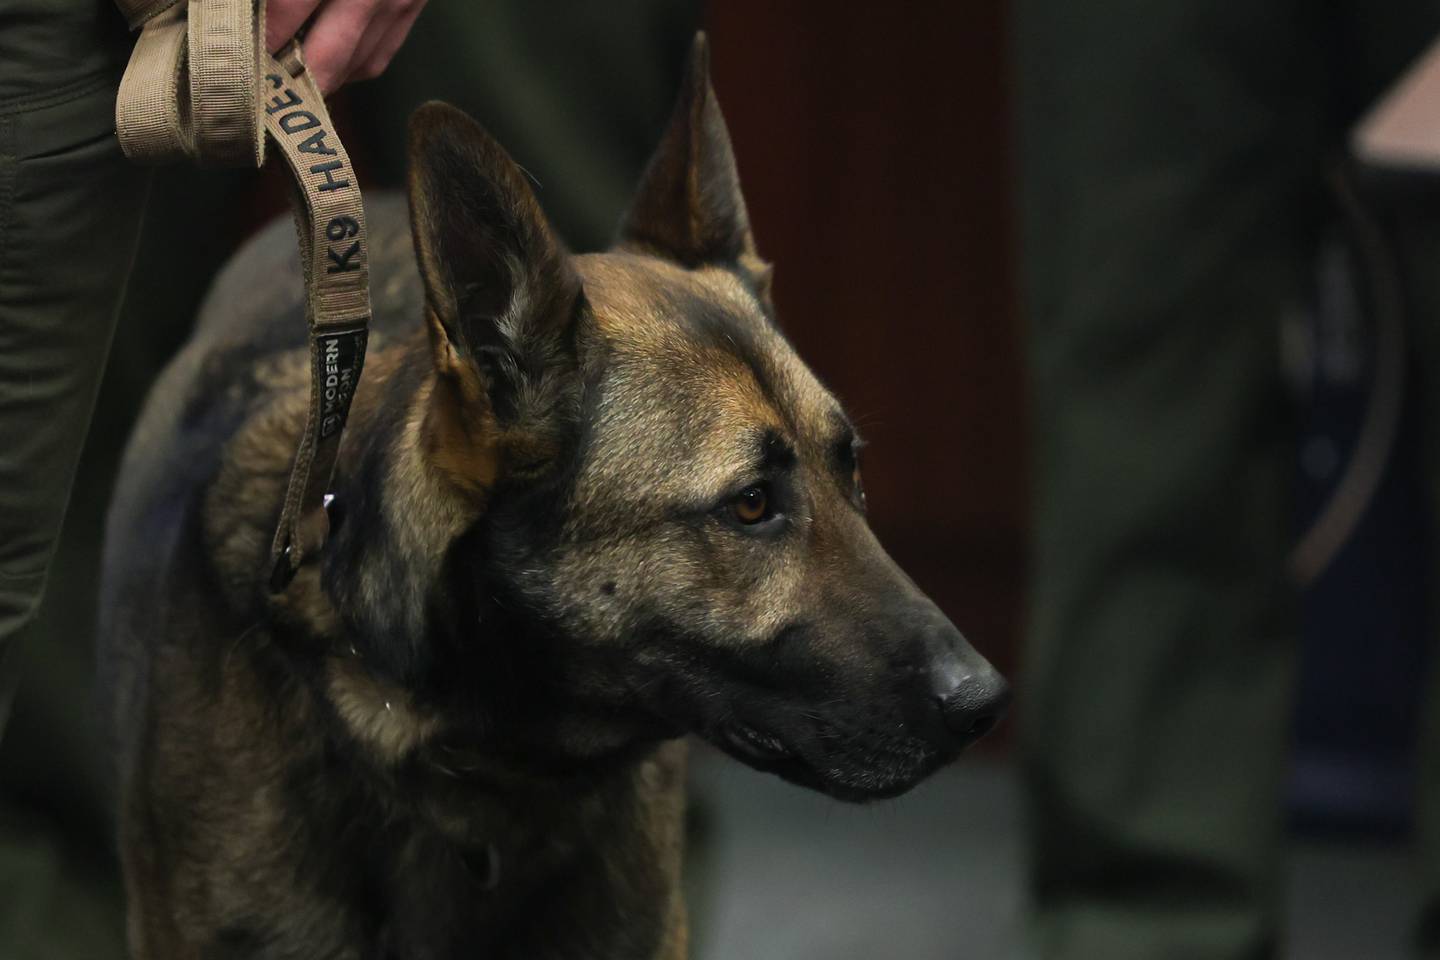 Illinois State Police dog Hades attends a press conference held by Will County State’s Attorney James Glasgow on Wednesday for the announcement of Jordan Henry’s 22-year prison sentence after Henry was convicted of aggravated vehicular hijacking, armed robbery, fleeing and other offenses. Henry was convicted of striking Hades.